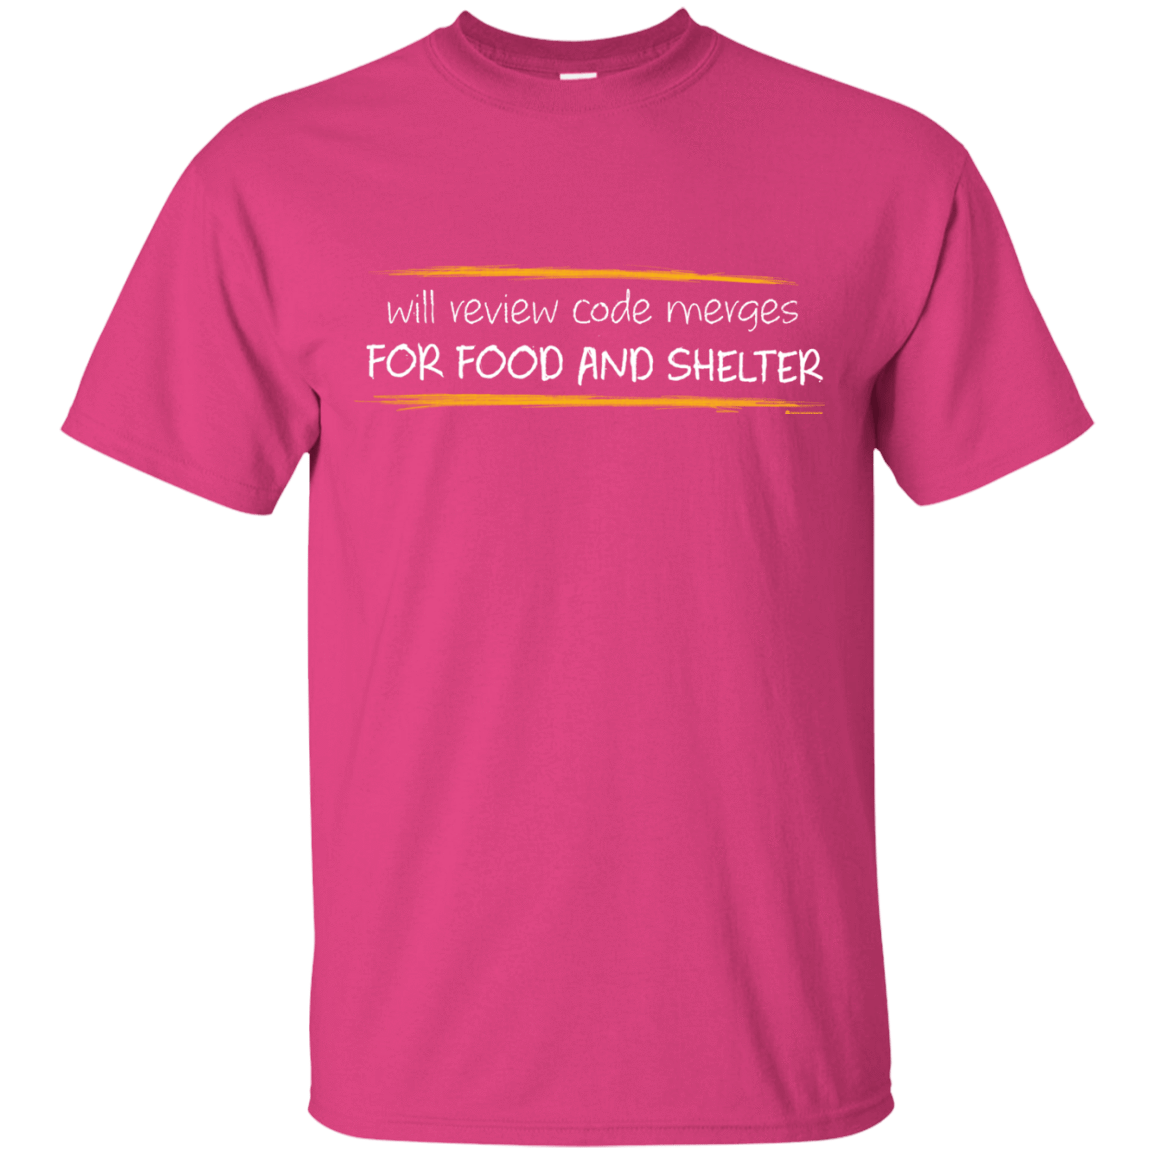 T-Shirts Heliconia / Small Reviewing Code For Food And Shelter T-Shirt